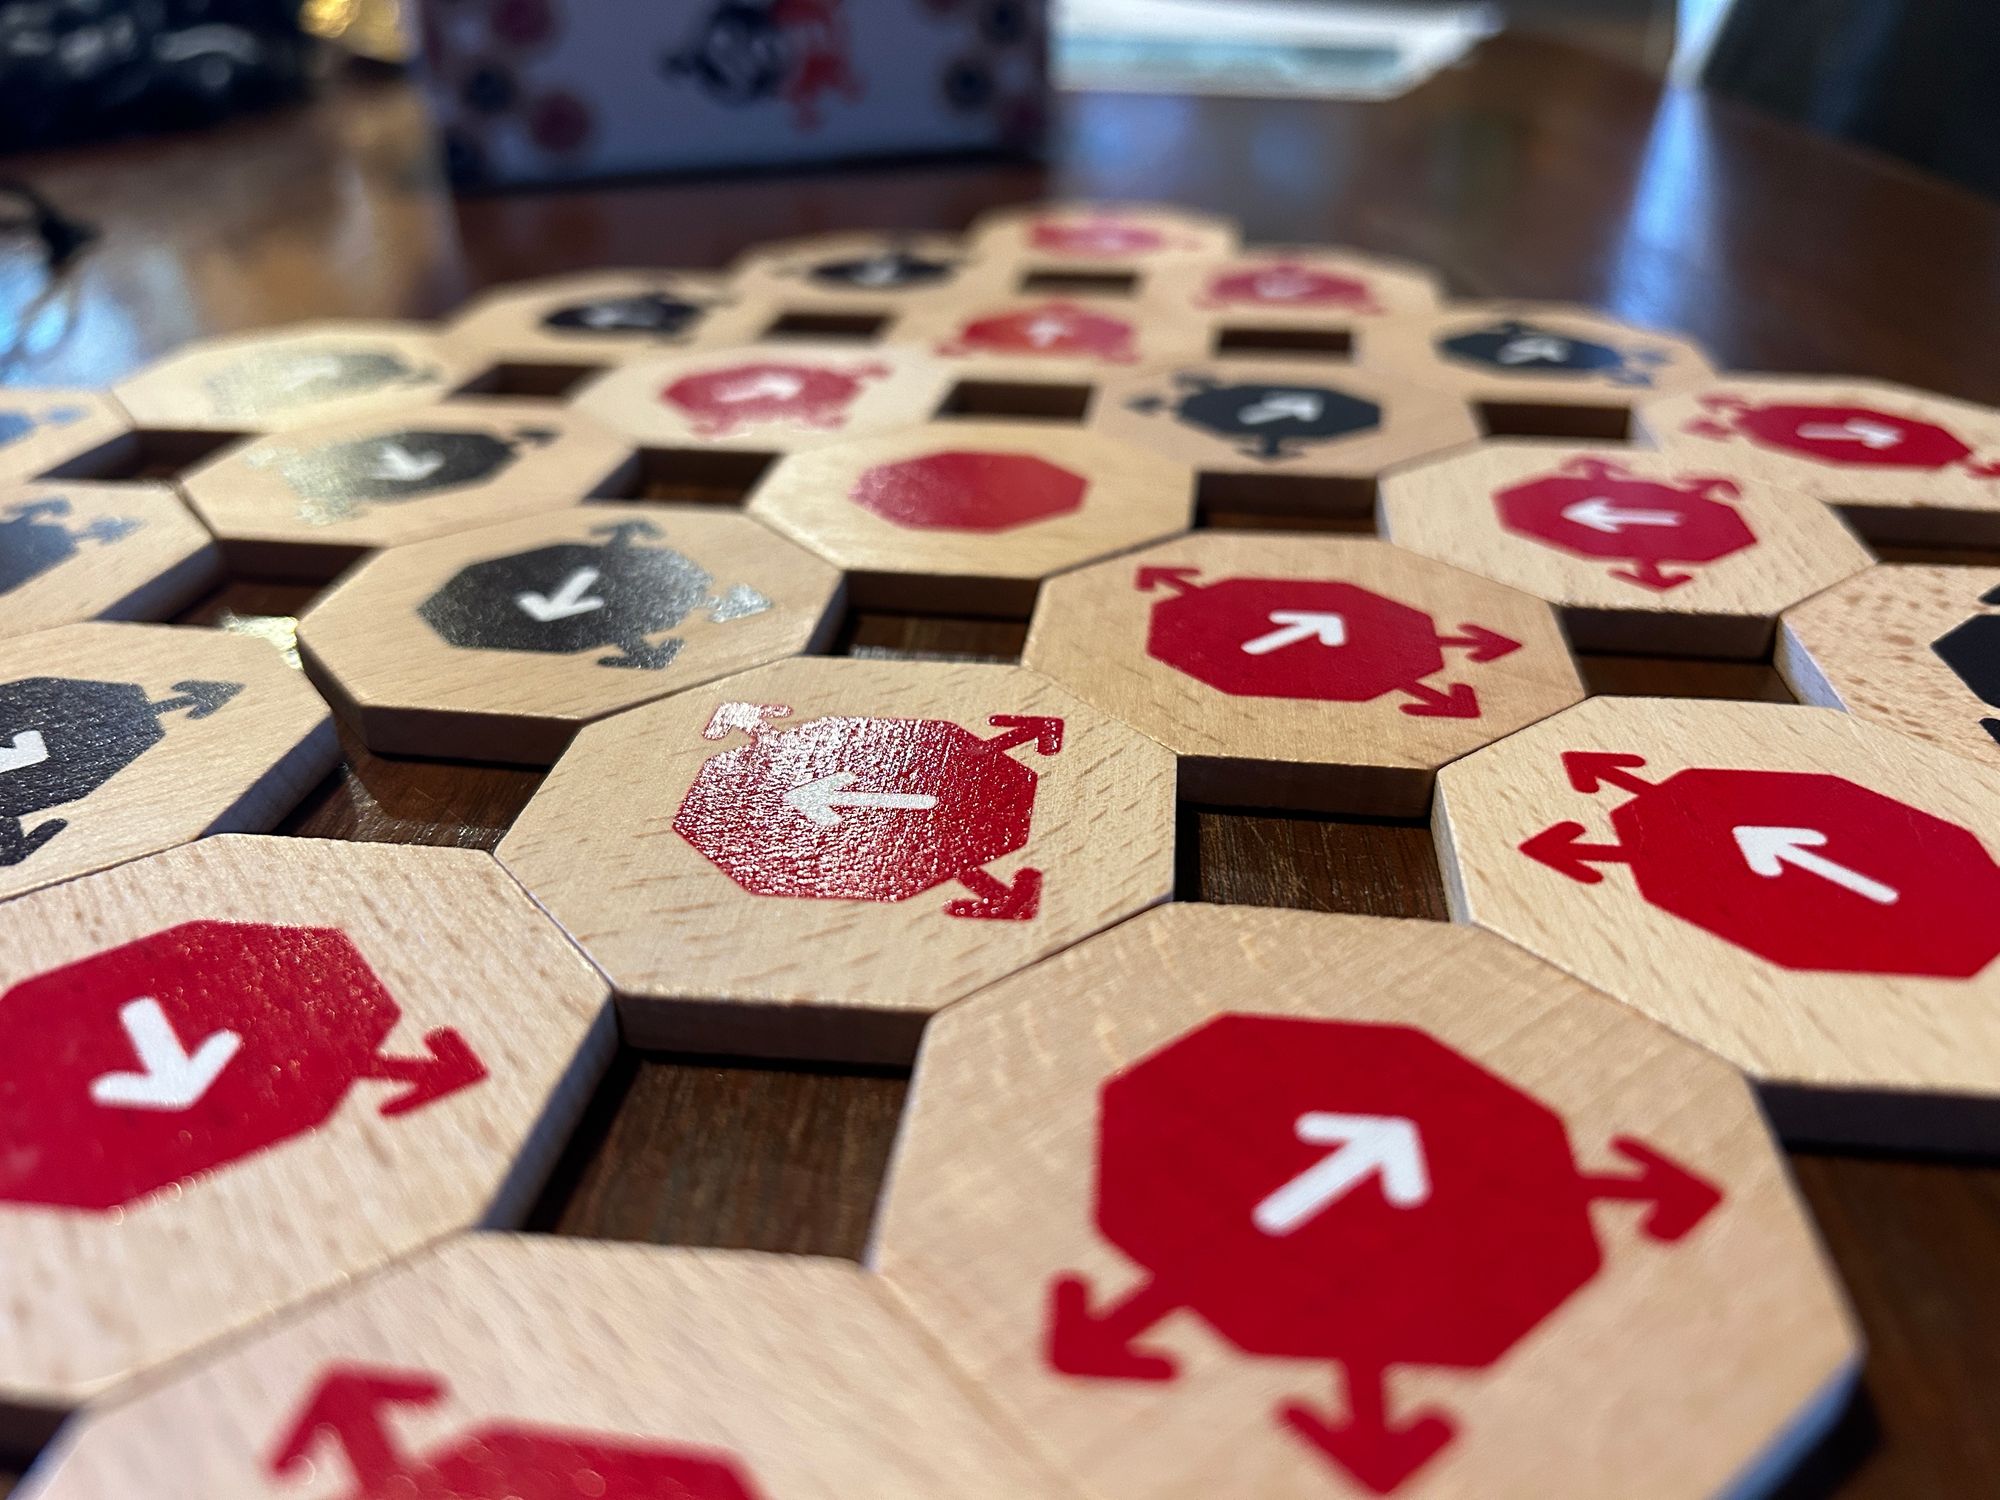 An image of a hexagonal tile board game decorated with arrows facing different directions.